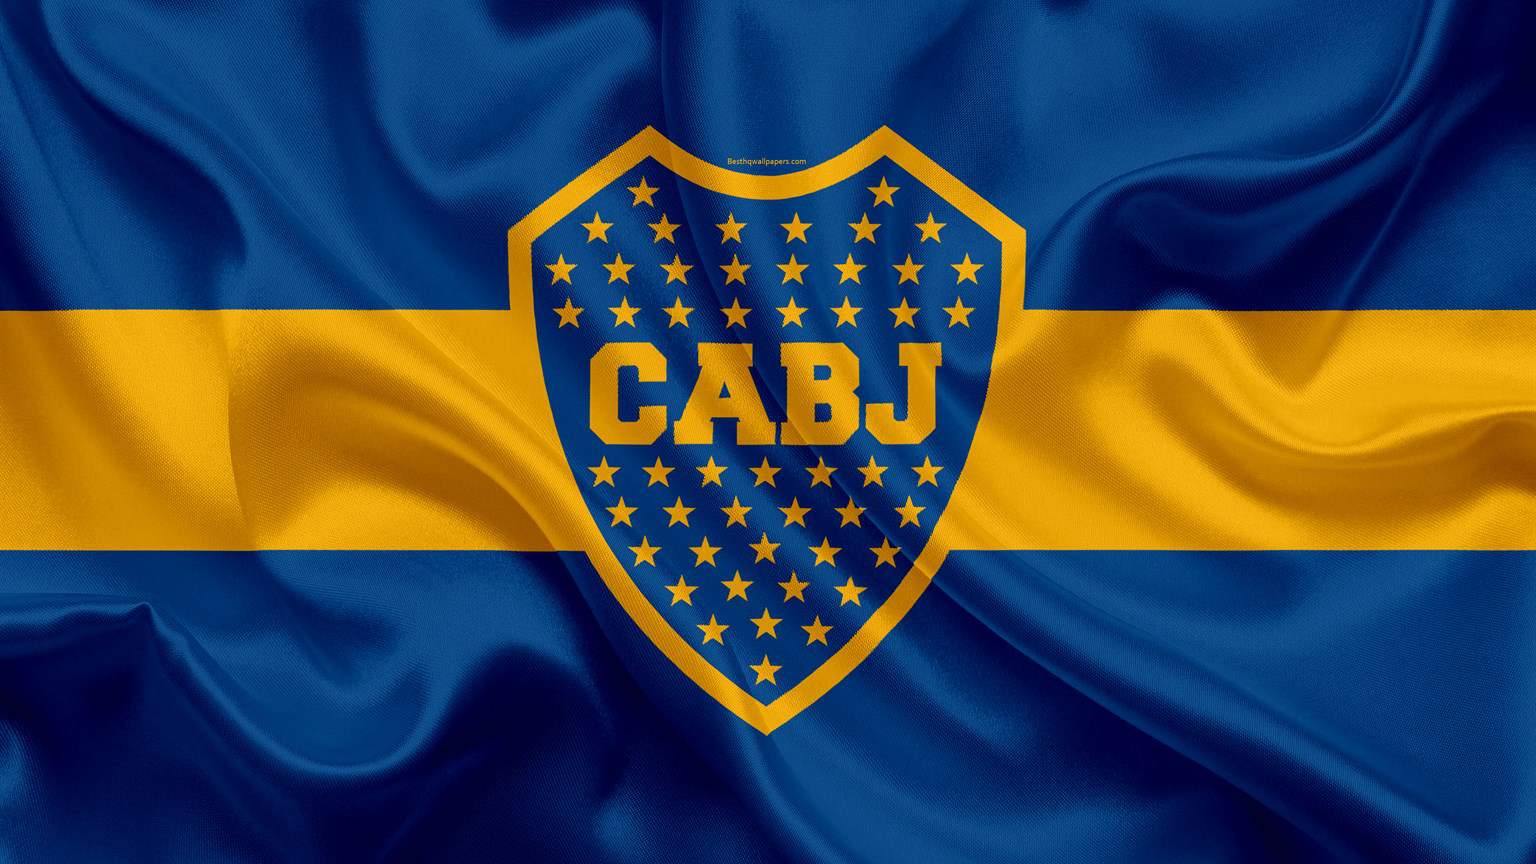 Argentina's Largest Soccer Team, Boca Juniors, Is Considering to Launch a Club NFT